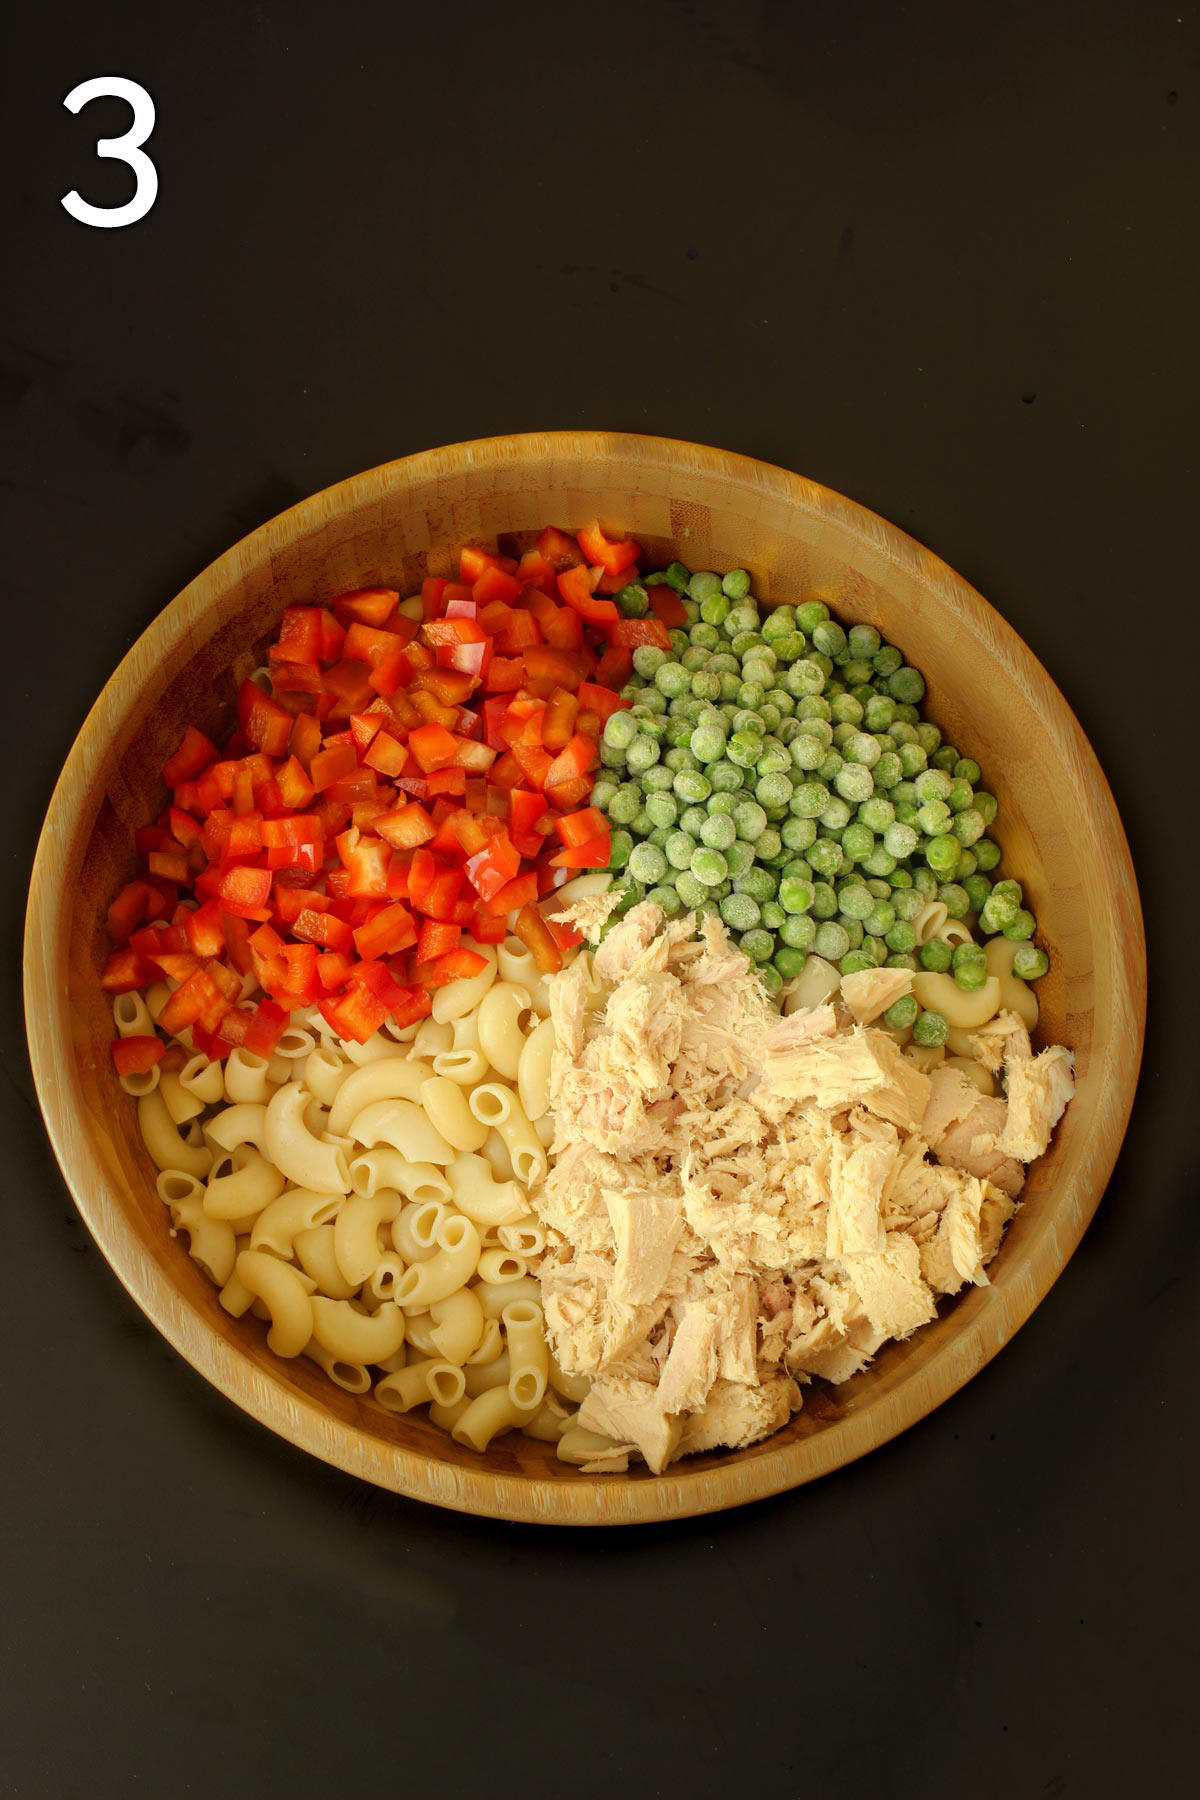 peppers, peas, tuna, and pasta arranged in quarters in the wooden bowl.